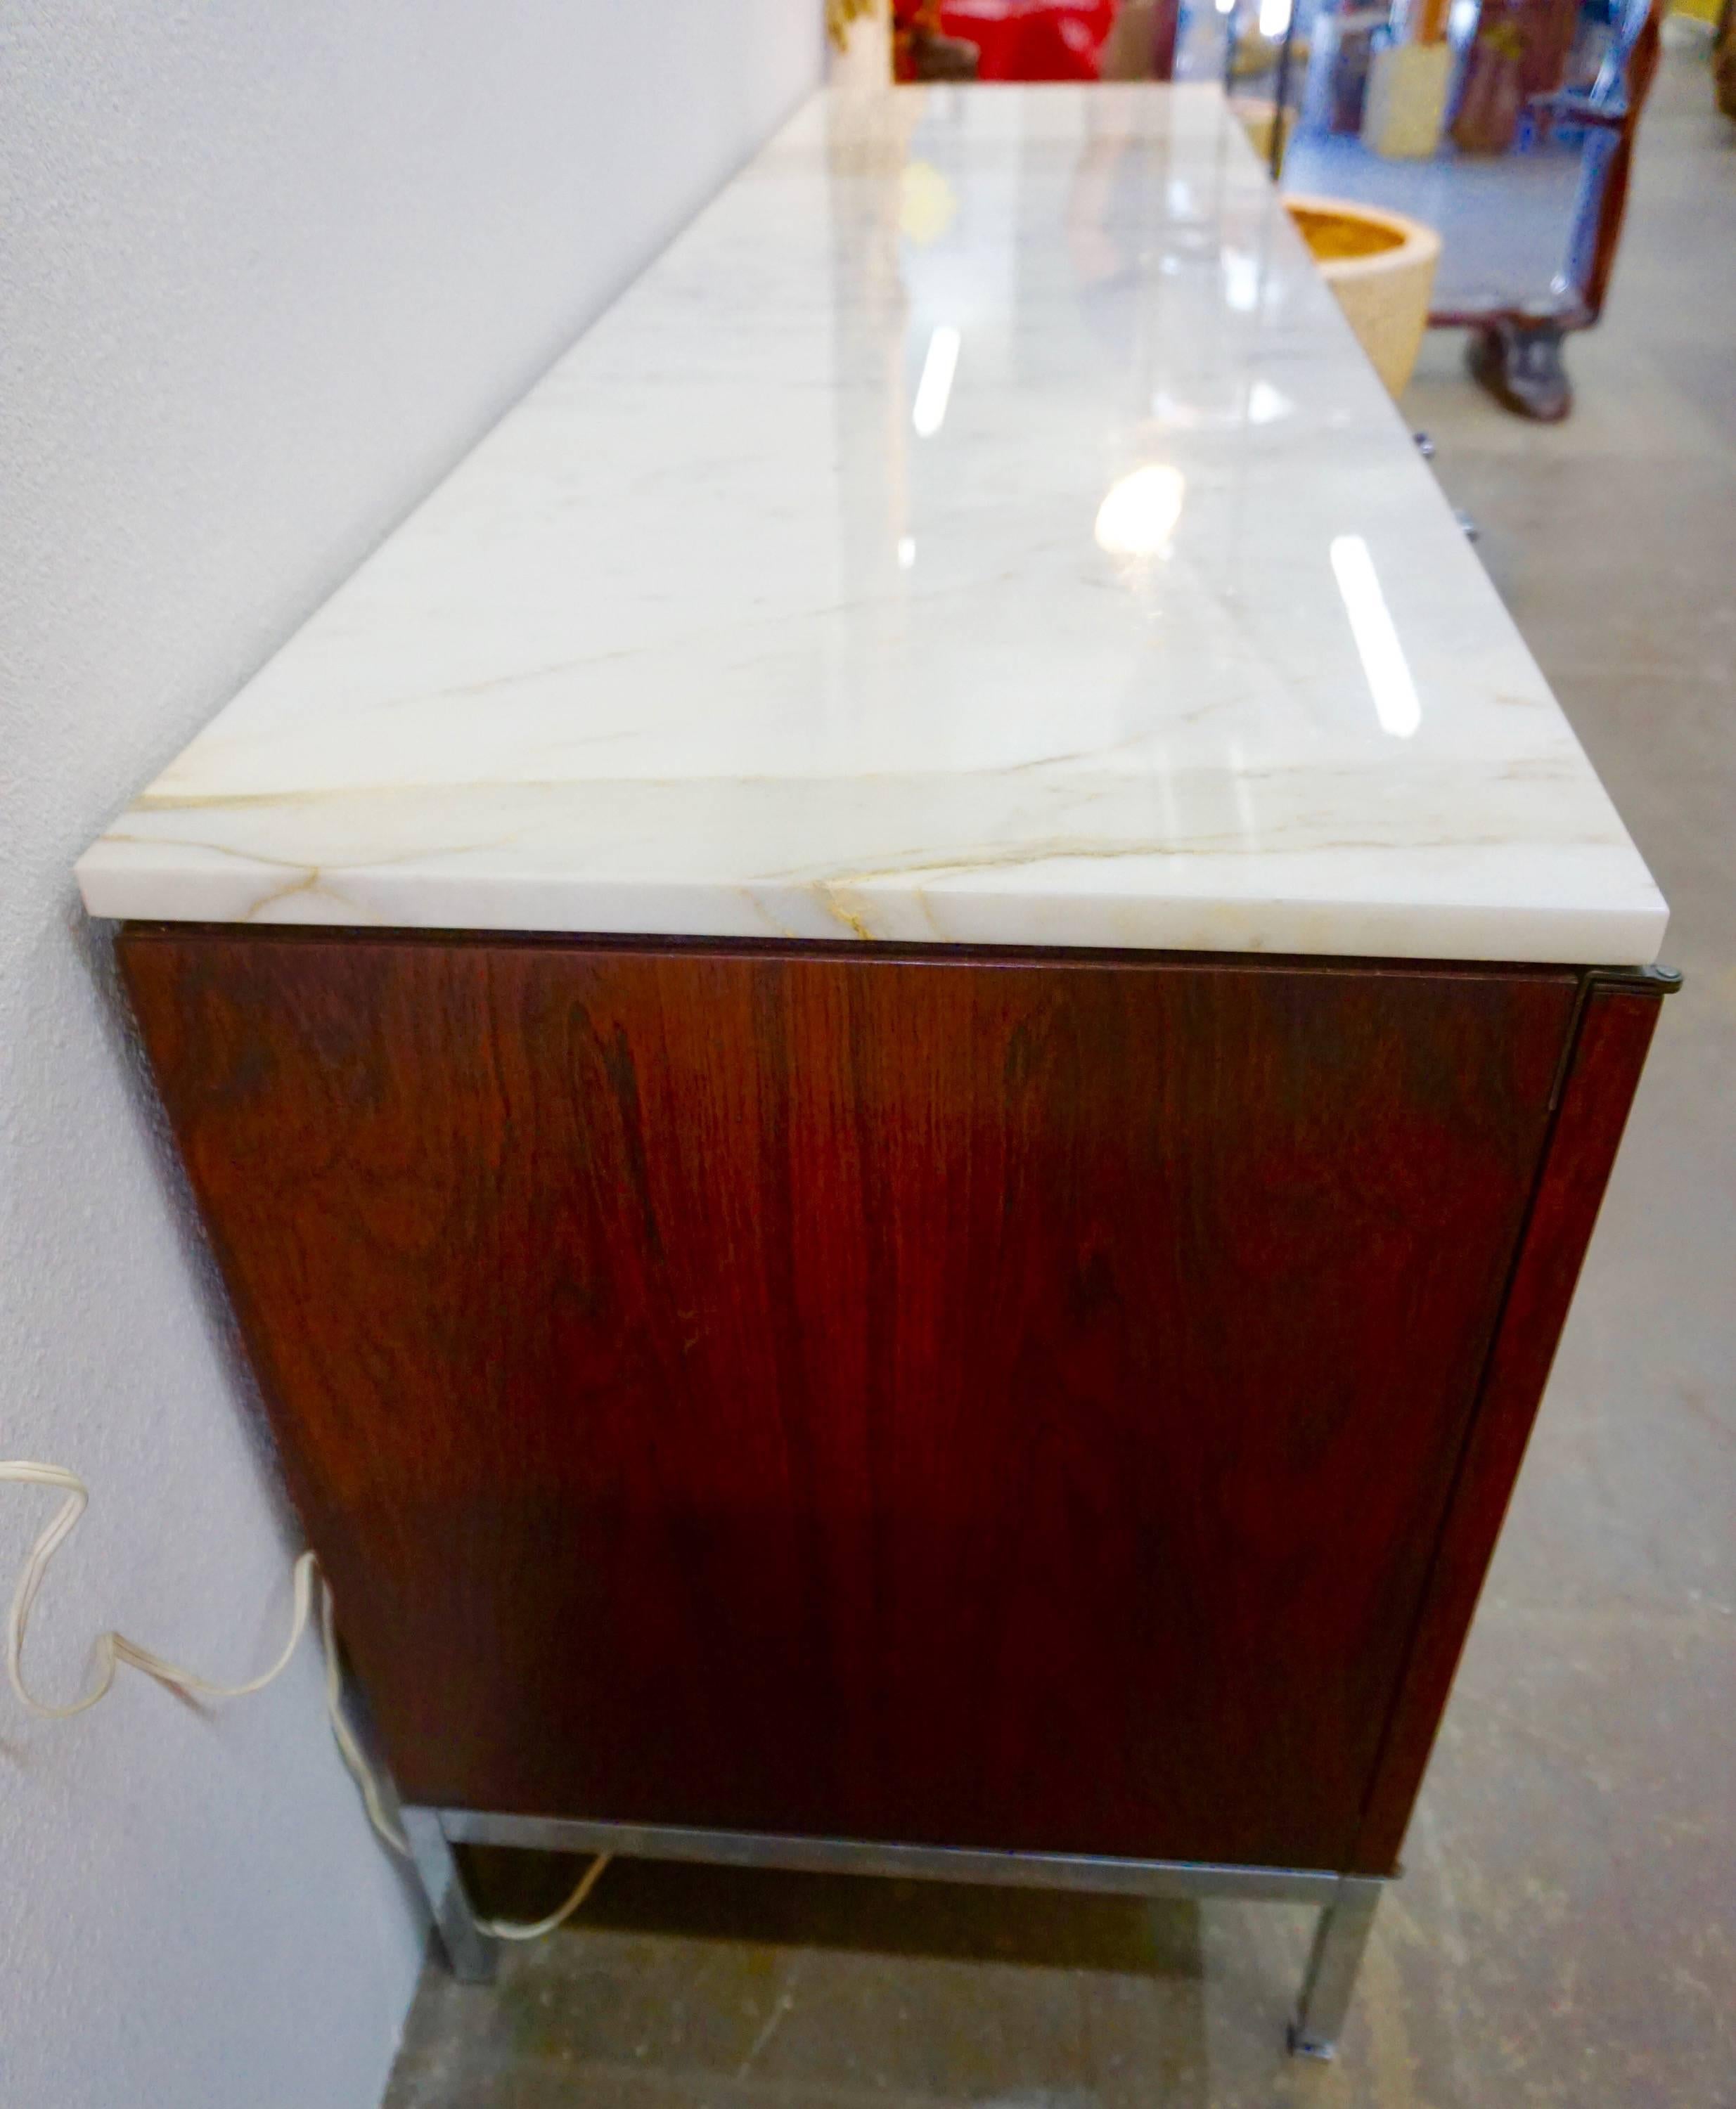 Exceptional bookmatched rosewood grain, Carrara marble top, chromed steel base and pulls. Great for home or office.